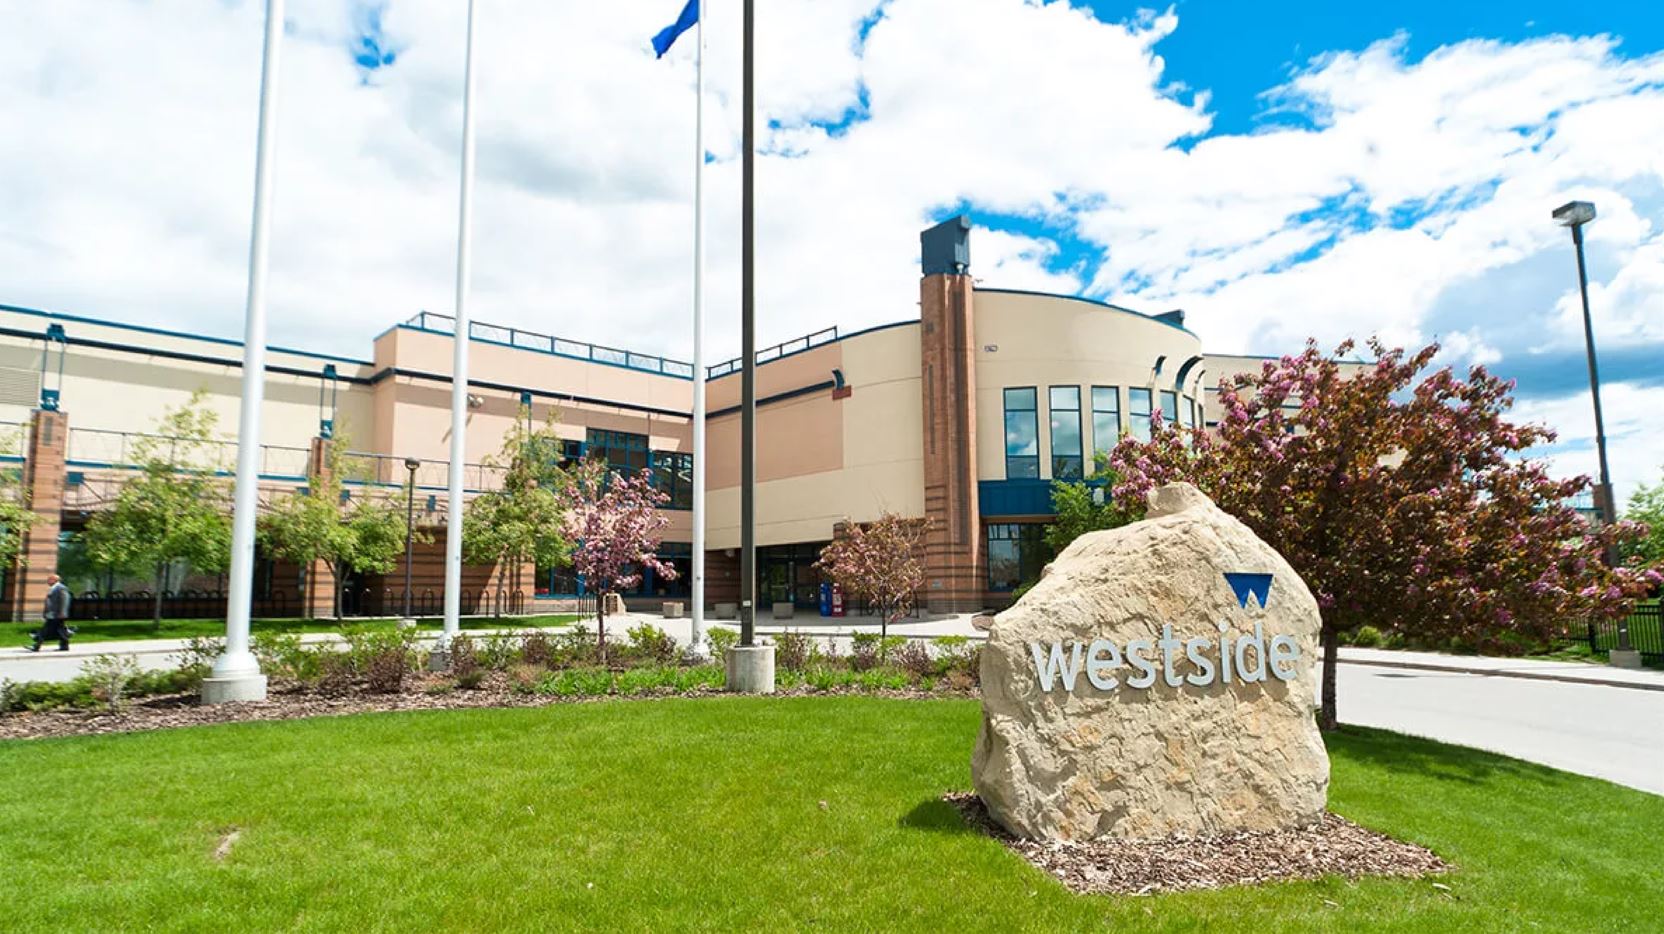 Three Reasons to Love Westside Rec. Centre in Calgary